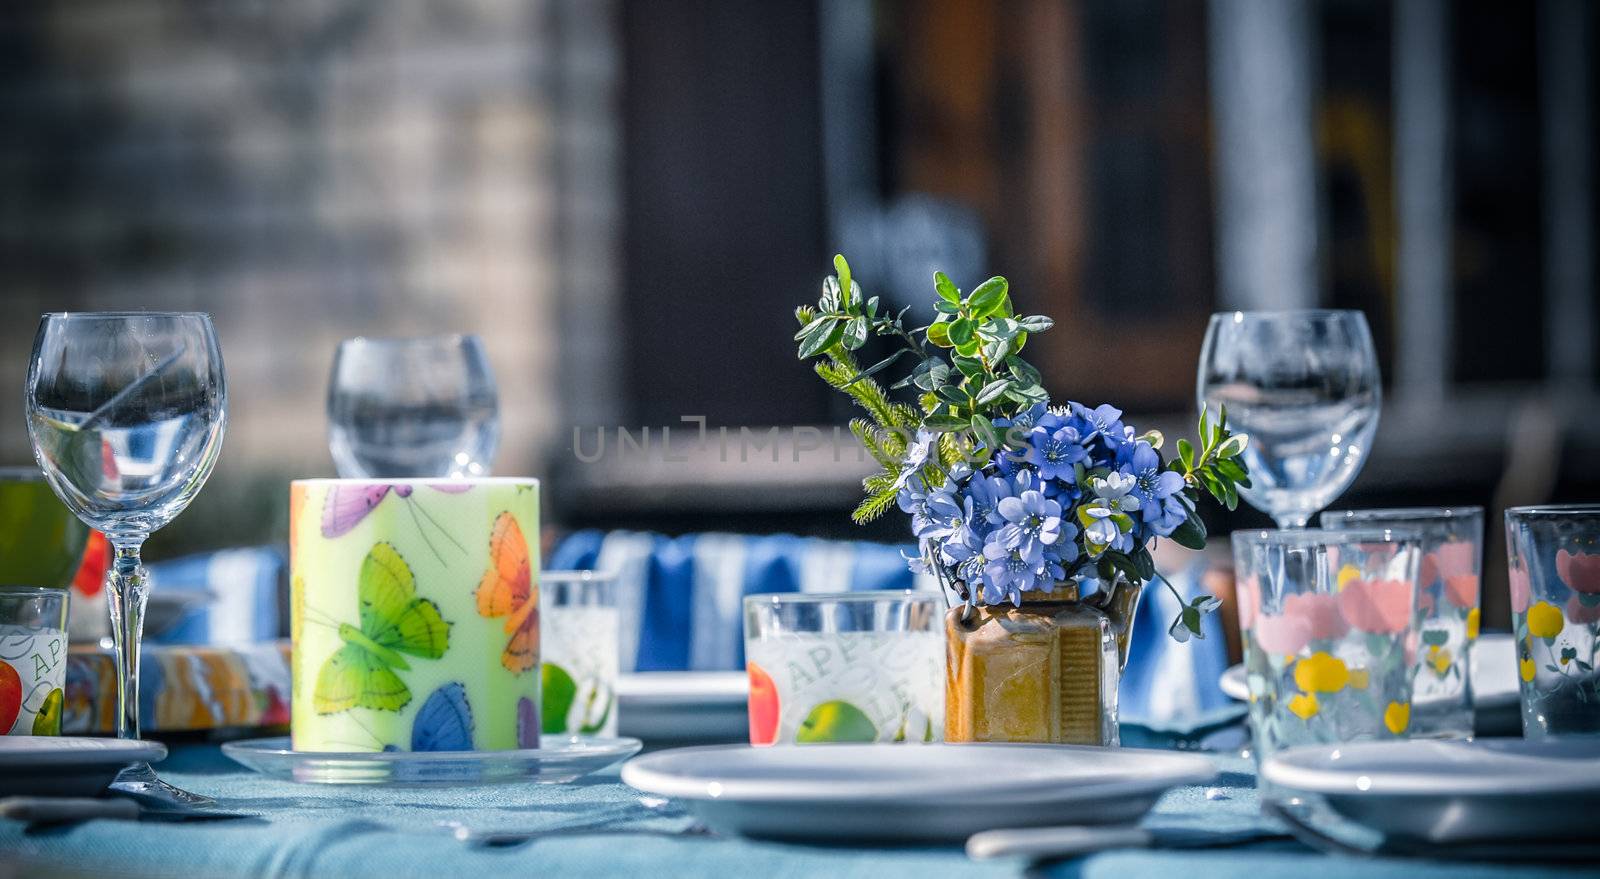 Table set outside for lunch or dinner. The table is decorated with spring flowers and colorful glassware. It is a sunny day in a countryside.